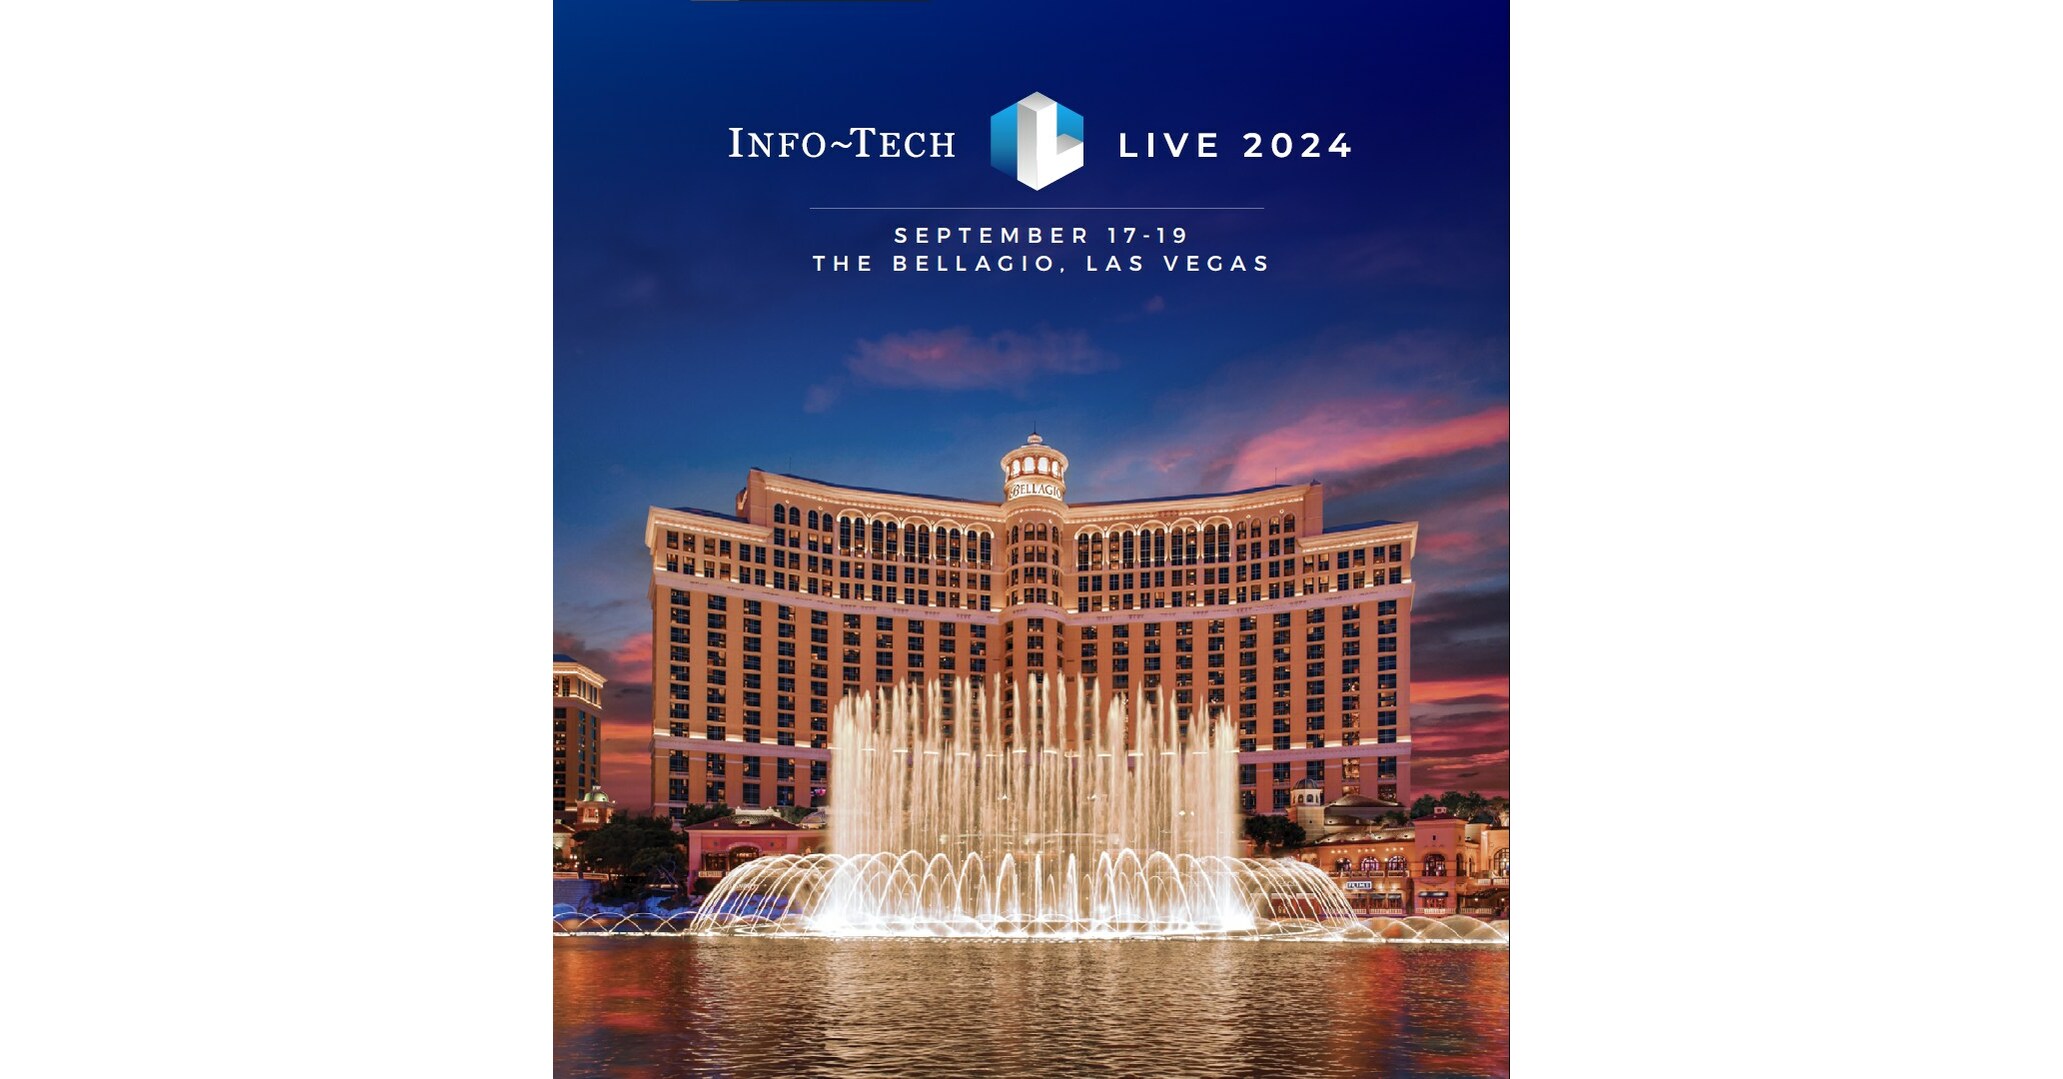 The Future of IT InfoTech LIVE 2024 Conference Announced for